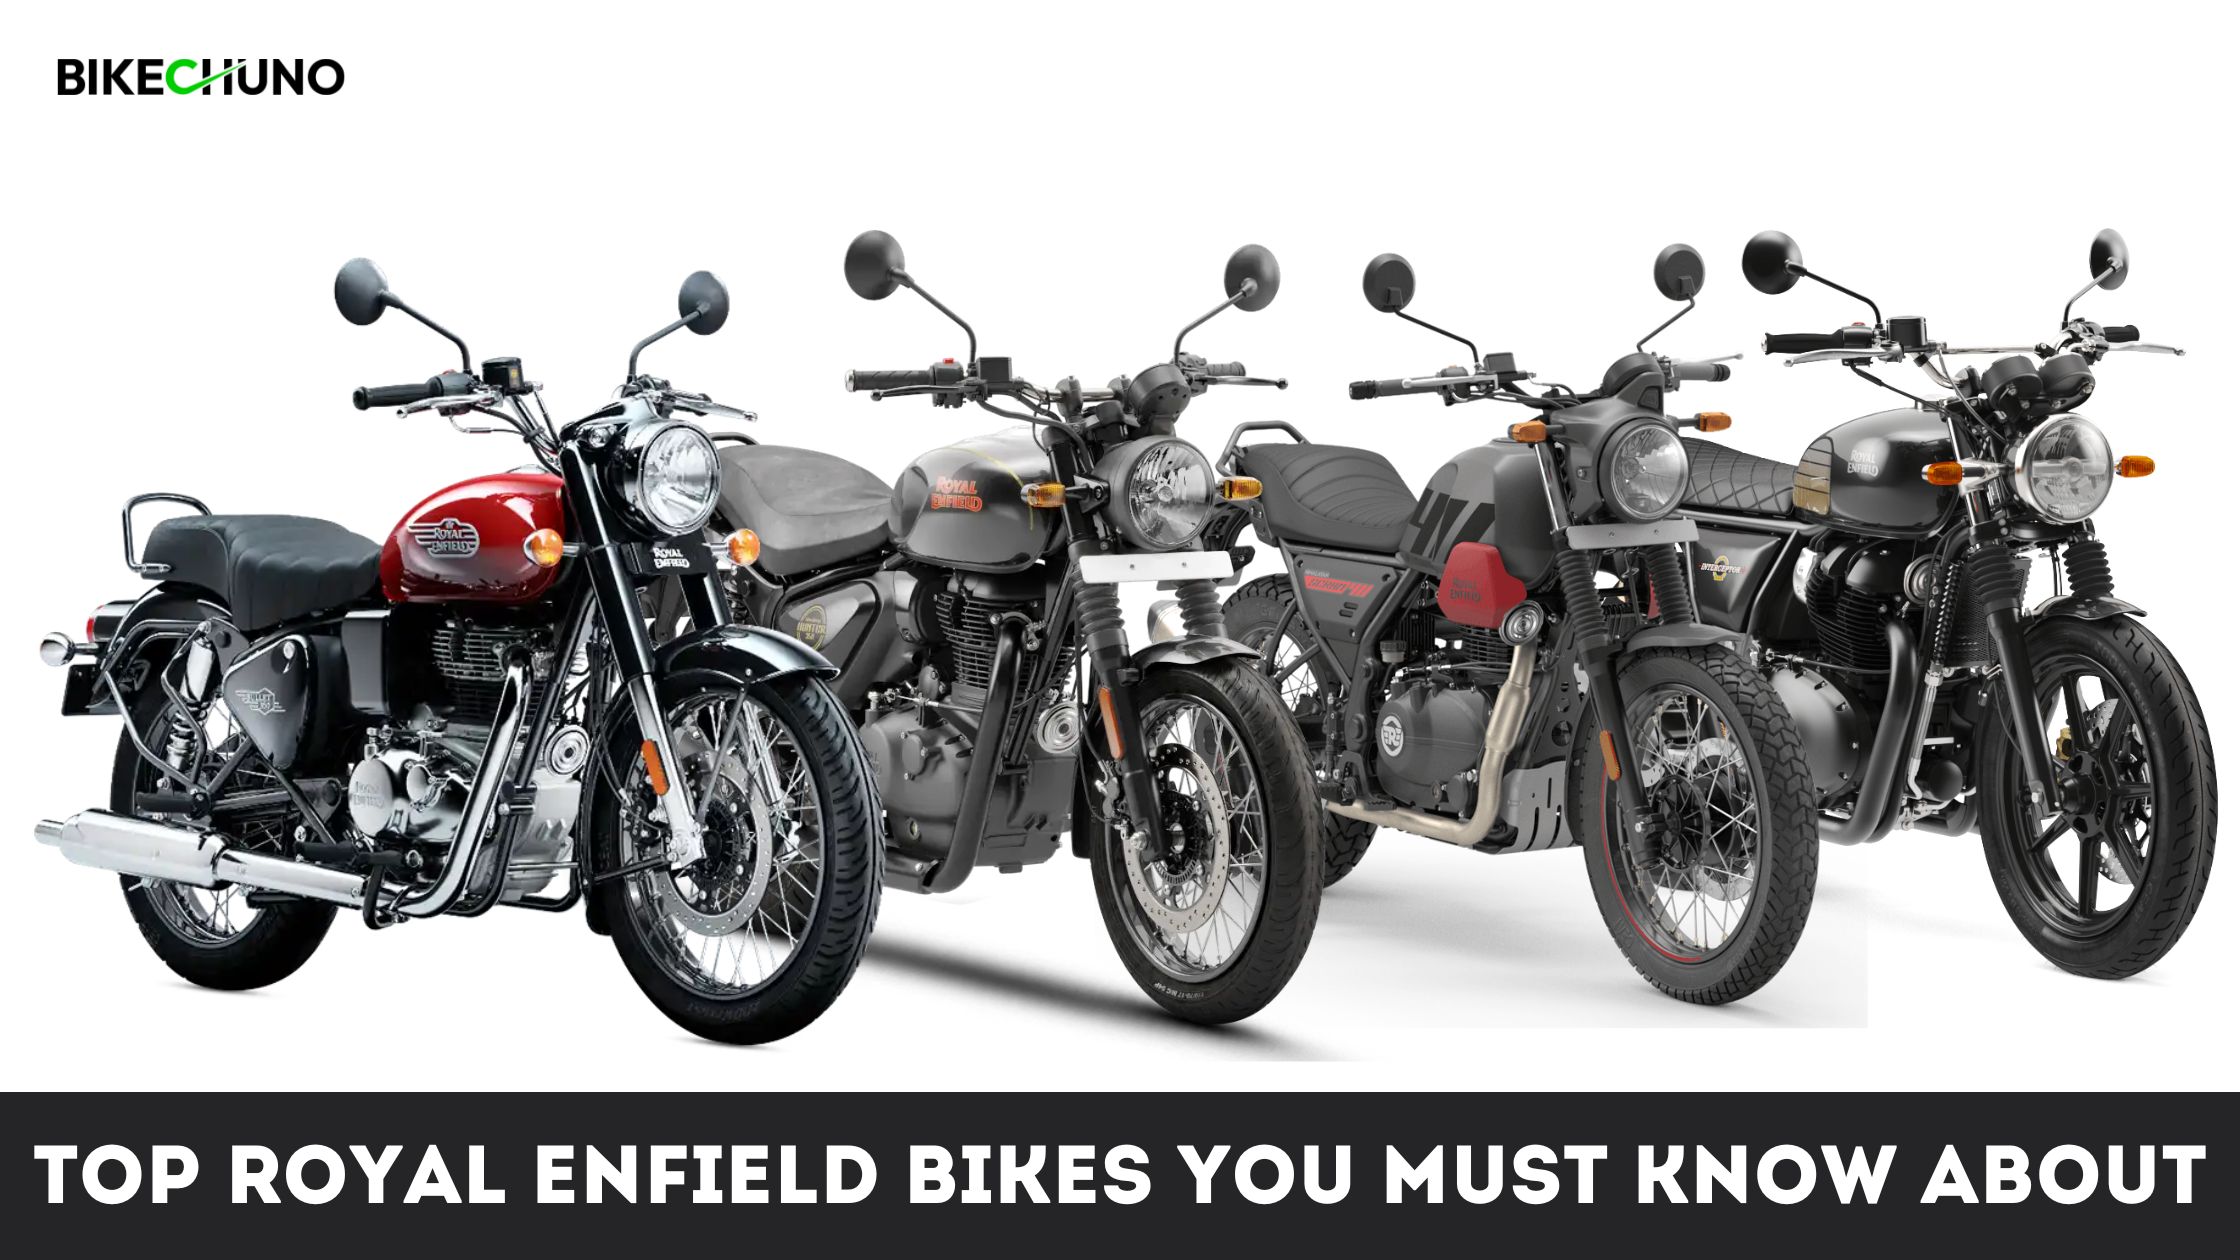 Top Royal Enfield Bikes You Must Know About